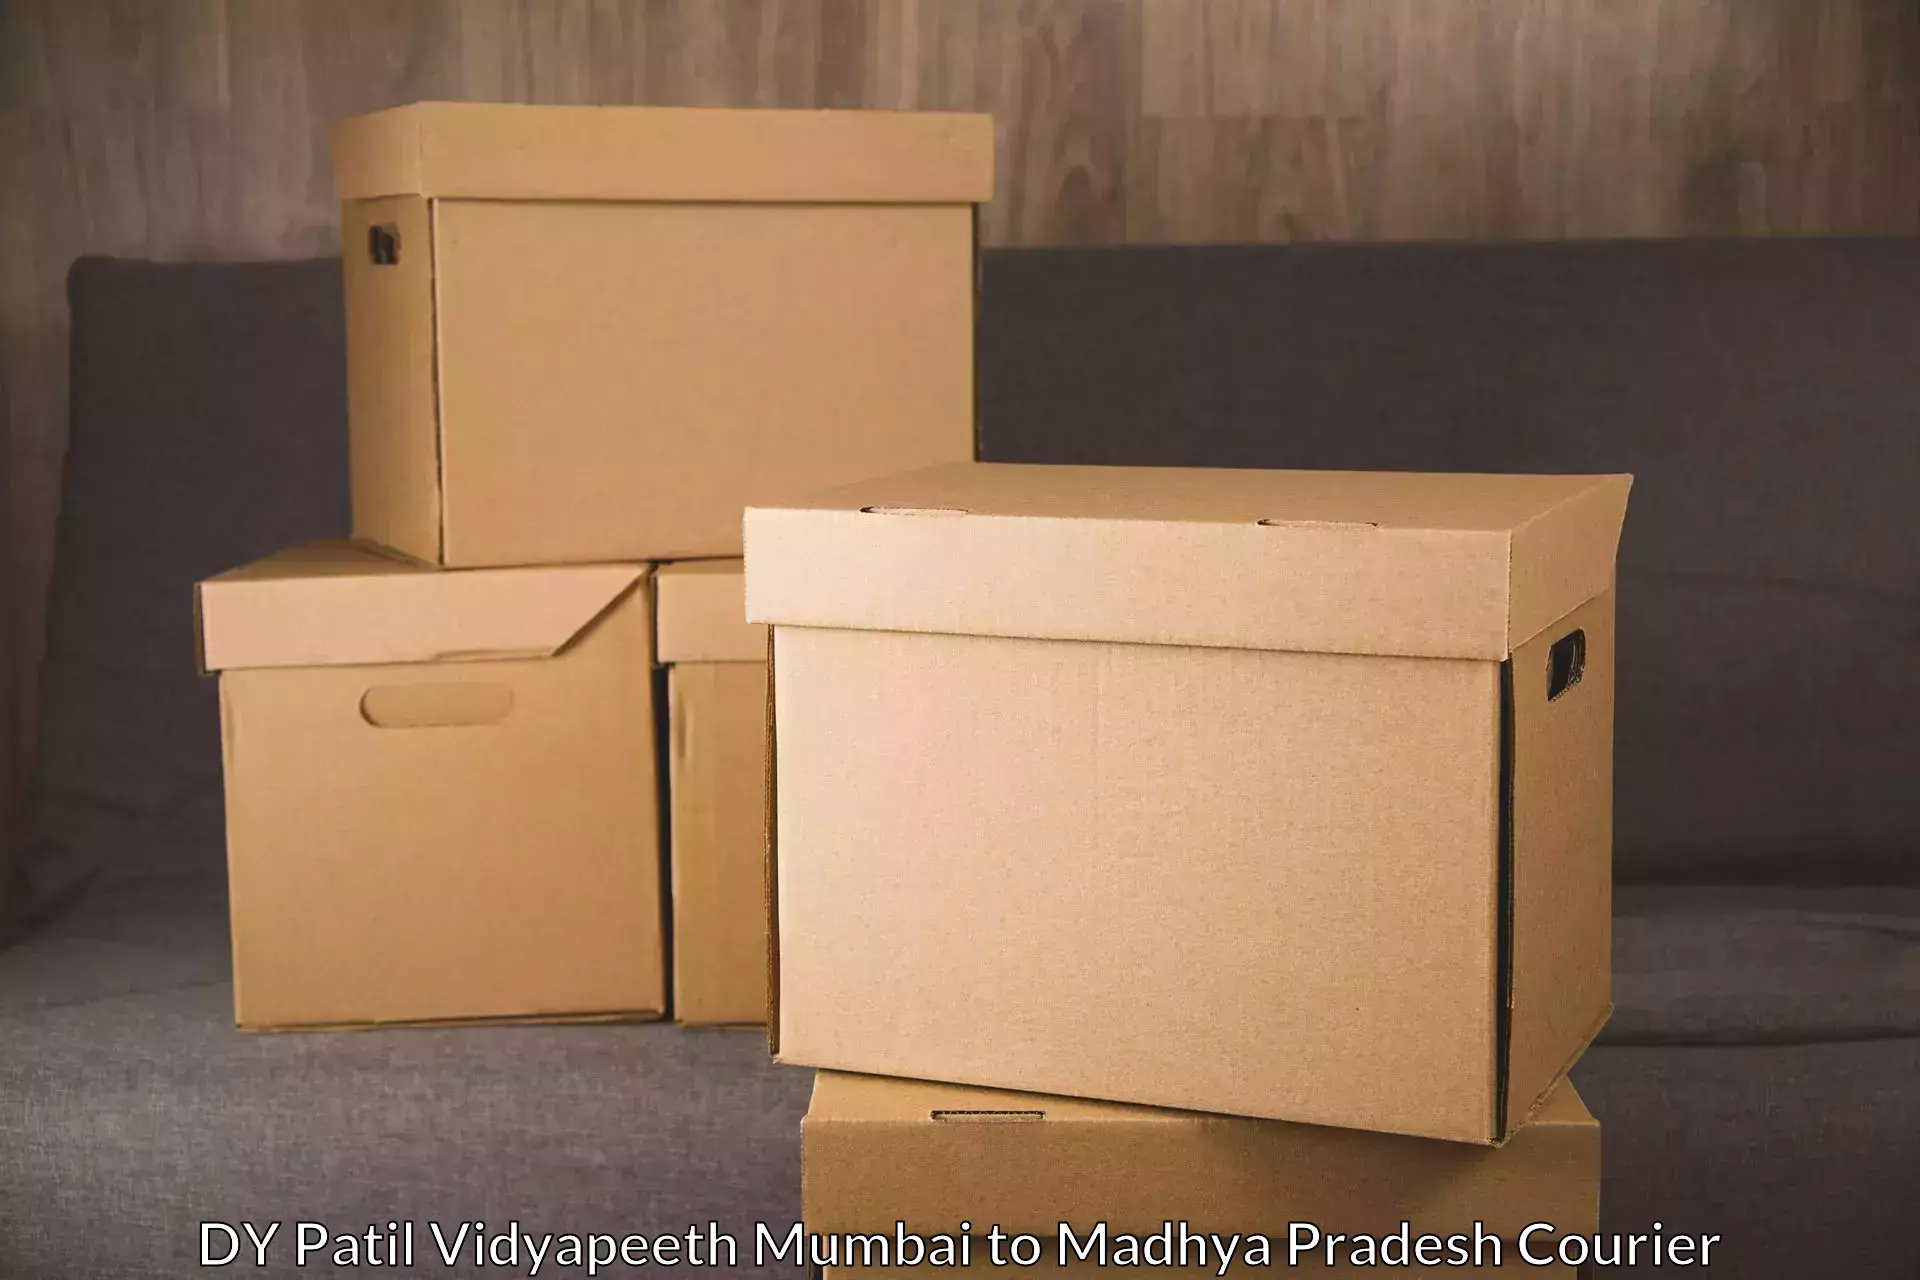 Efficient package consolidation DY Patil Vidyapeeth Mumbai to Indore